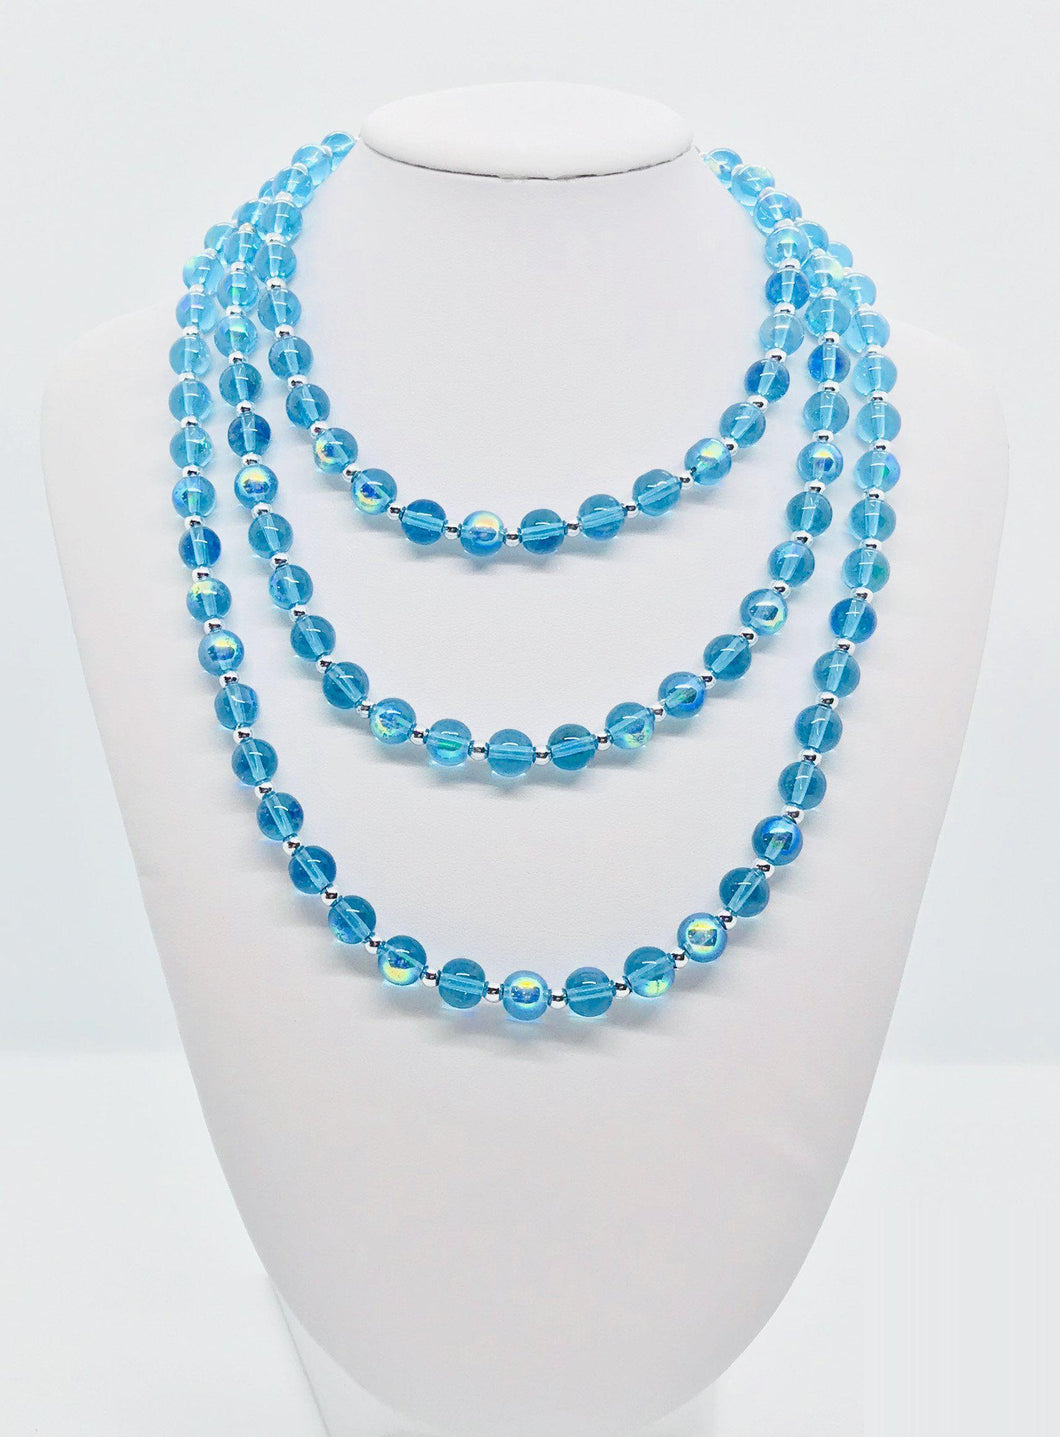 Aqua and Silver Glass Bead Necklace - N114